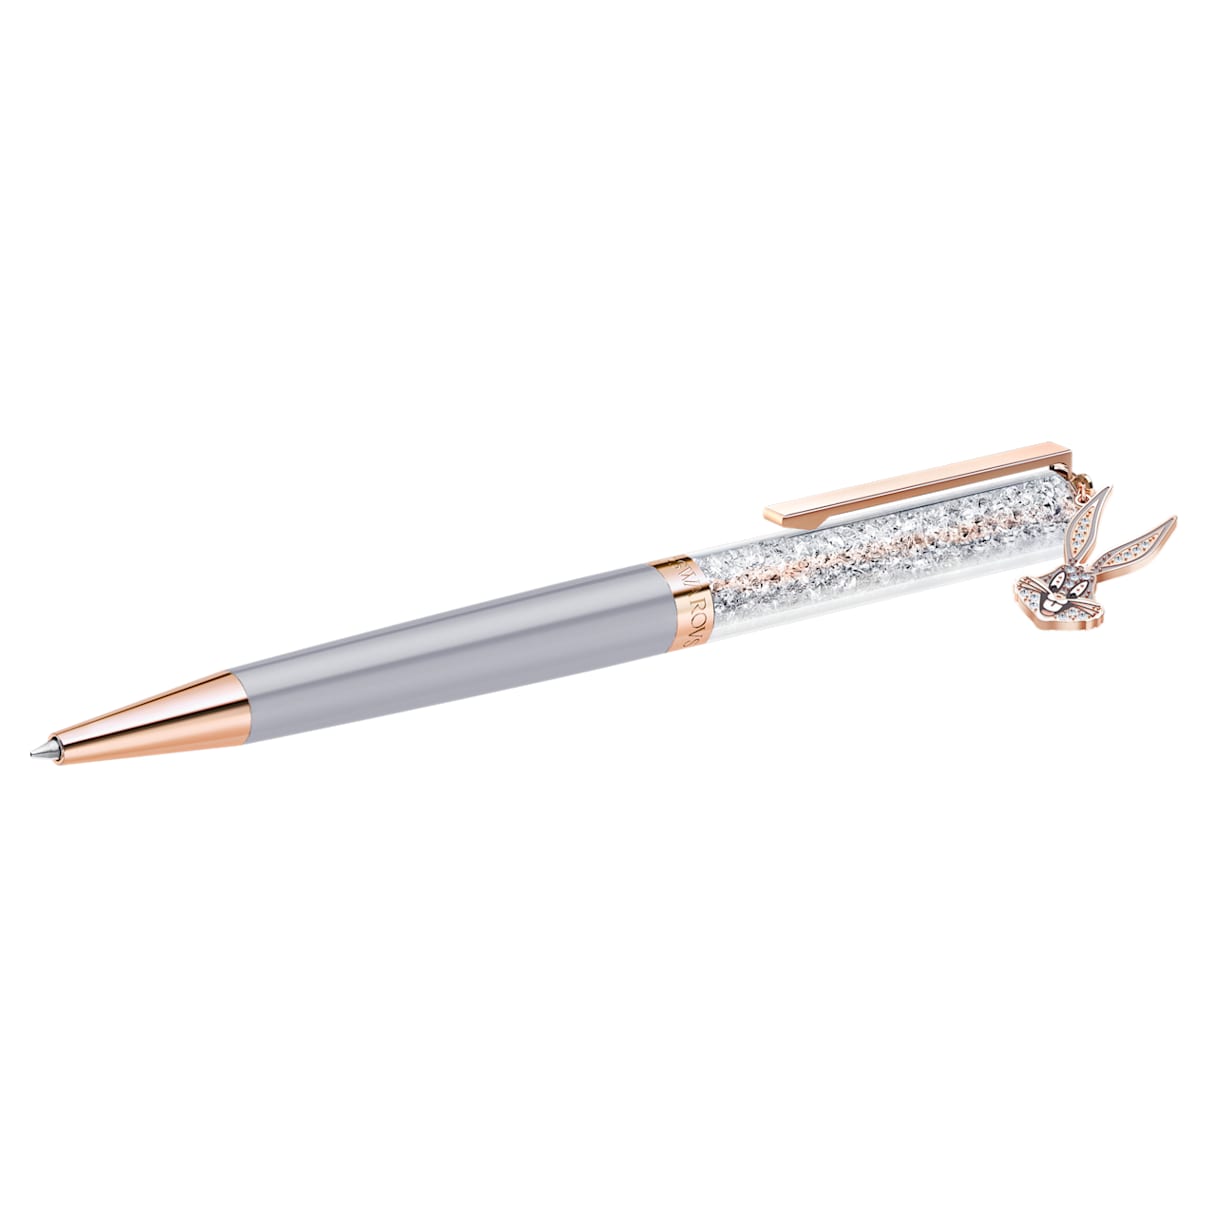 Crystalline Warner Bros. Bugs Bunny Pen, Gray, Rose-gold tone plated